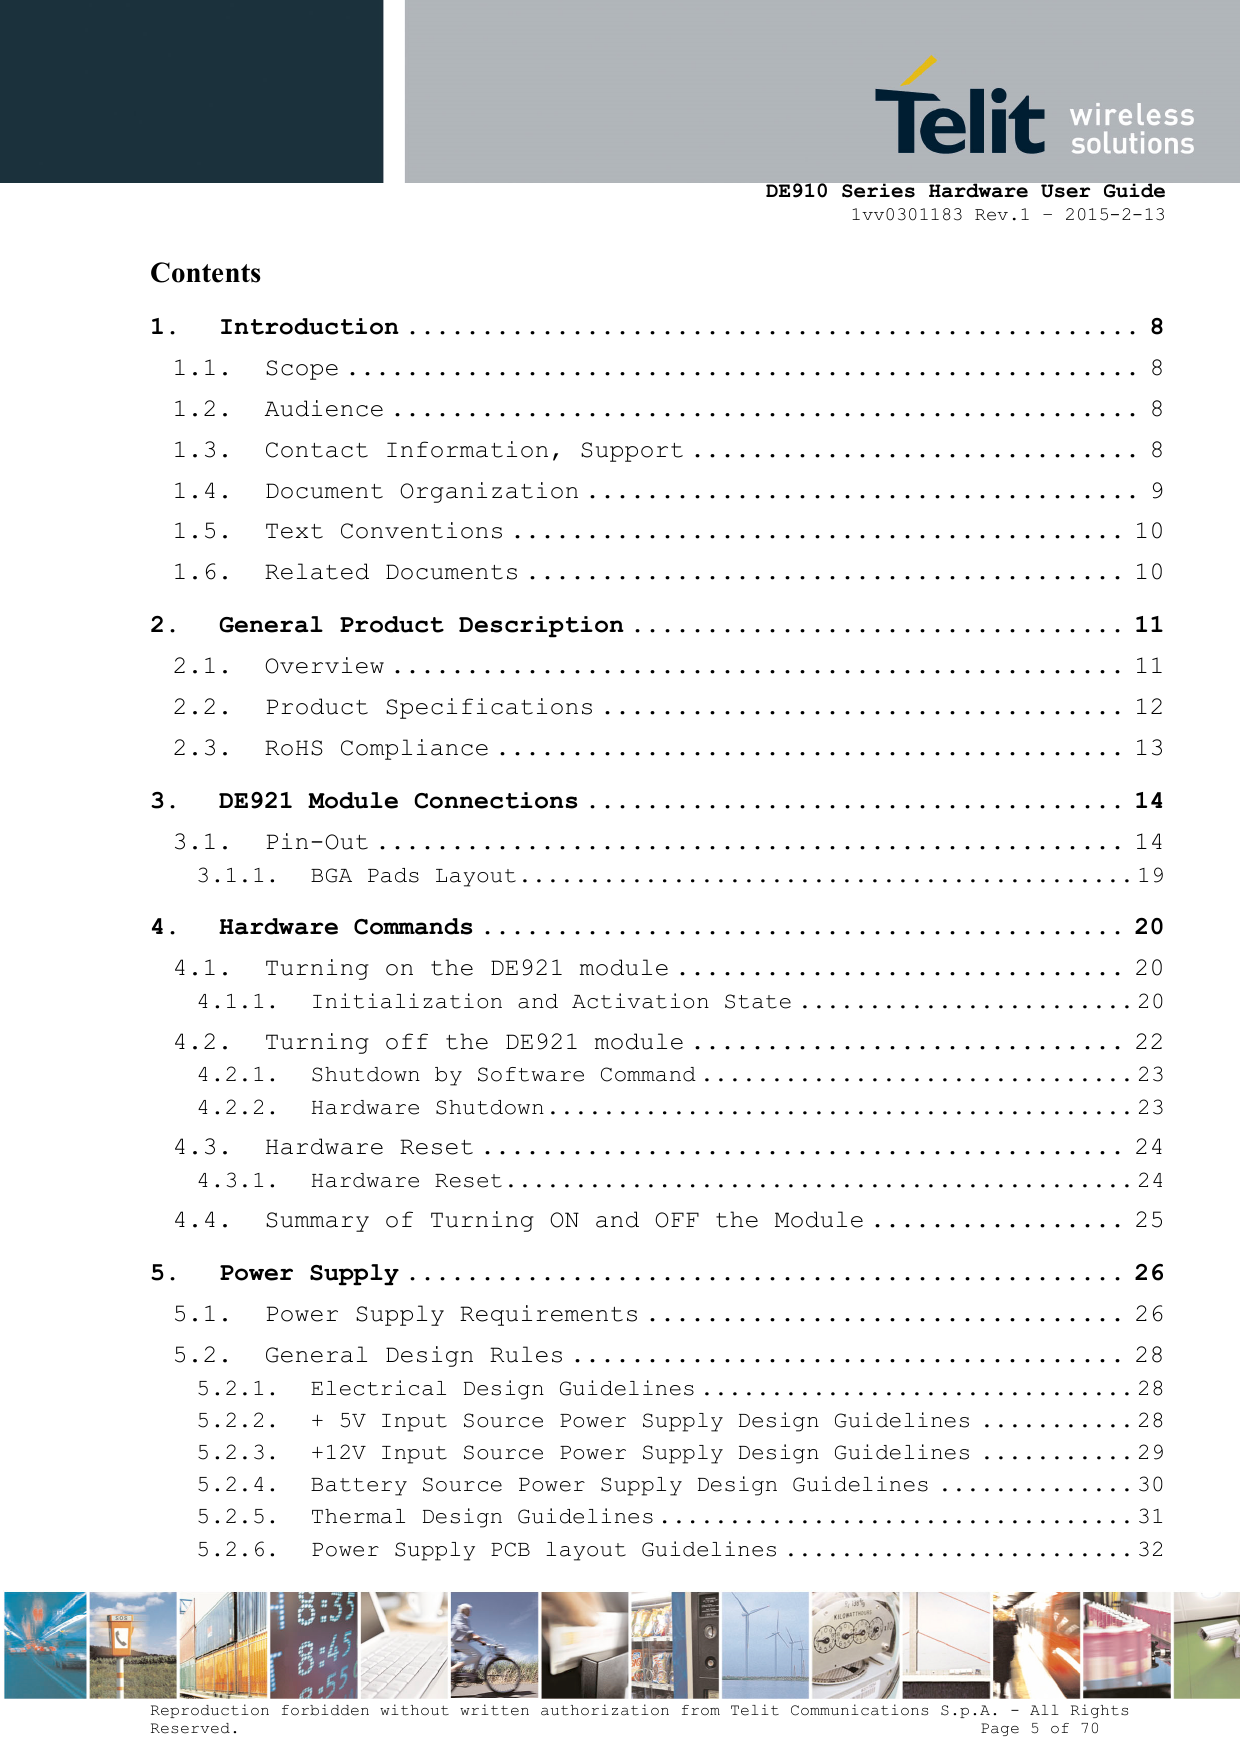      DE910 Series Hardware User Guide 1vv0301183 Rev.1 – 2015-2-13 Reproduction forbidden without written authorization from Telit Communications S.p.A. - All Rights Reserved.                                                                          Page 5 of 70 Contents 1. Introduction ................................................. 8 1.1. Scope ..................................................... 8 1.2. Audience .................................................. 8 1.3. Contact Information, Support .............................. 8 1.4. Document Organization ..................................... 9 1.5. Text Conventions ......................................... 10 1.6. Related Documents ........................................ 10 2. General Product Description ................................. 11 2.1. Overview ................................................. 11 2.2. Product Specifications ................................... 12 2.3. RoHS Compliance .......................................... 13 3. DE921 Module Connections .................................... 14 3.1. Pin-Out .................................................. 14 3.1.1. BGA Pads Layout ............................................ 19 4. Hardware Commands ........................................... 20 4.1. Turning on the DE921 module .............................. 20 4.1.1. Initialization and Activation State ........................ 20 4.2. Turning off the DE921 module ............................. 22 4.2.1. Shutdown by Software Command ............................... 23 4.2.2. Hardware Shutdown .......................................... 23 4.3. Hardware Reset ........................................... 24 4.3.1. Hardware Reset ............................................. 24 4.4. Summary of Turning ON and OFF the Module ................. 25 5. Power Supply ................................................ 26 5.1. Power Supply Requirements ................................ 26 5.2. General Design Rules ..................................... 28 5.2.1. Electrical Design Guidelines ............................... 28 5.2.2. + 5V Input Source Power Supply Design Guidelines ........... 28 5.2.3. +12V Input Source Power Supply Design Guidelines ........... 29 5.2.4. Battery Source Power Supply Design Guidelines .............. 30 5.2.5. Thermal Design Guidelines .................................. 31 5.2.6. Power Supply PCB layout Guidelines ......................... 32 